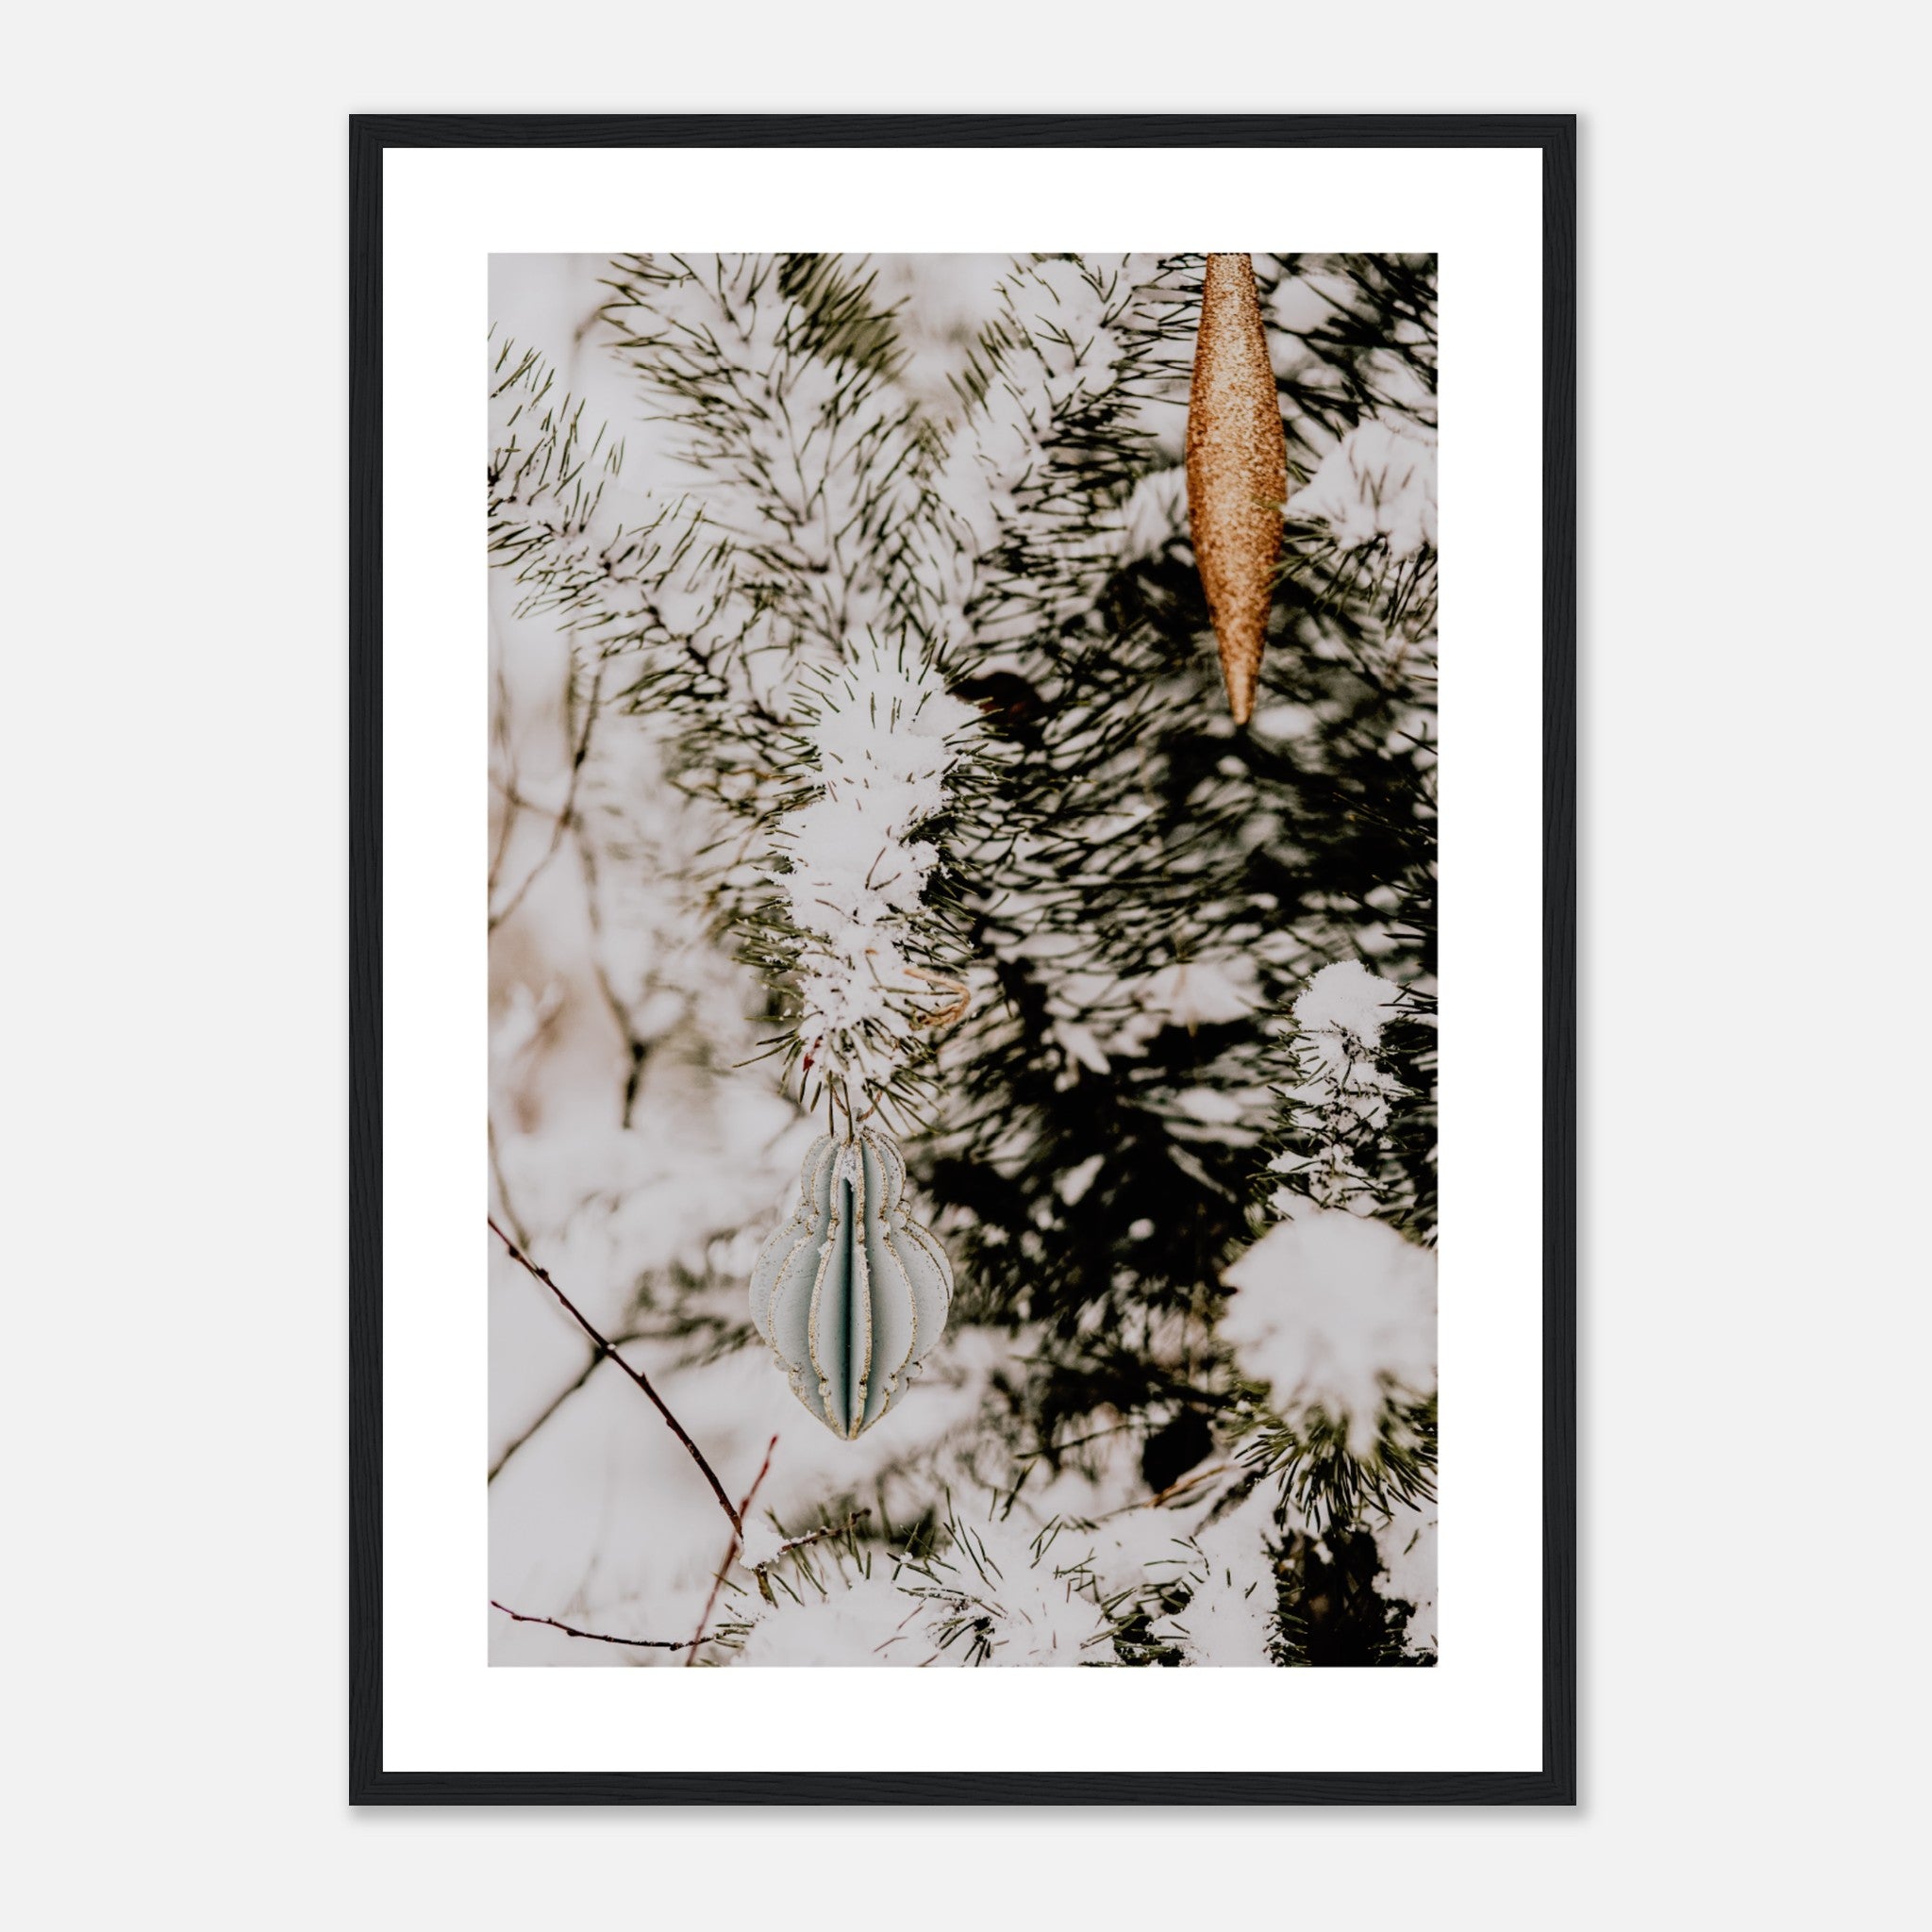 Decorating Christmas Tree Outdoors No.2 Poster